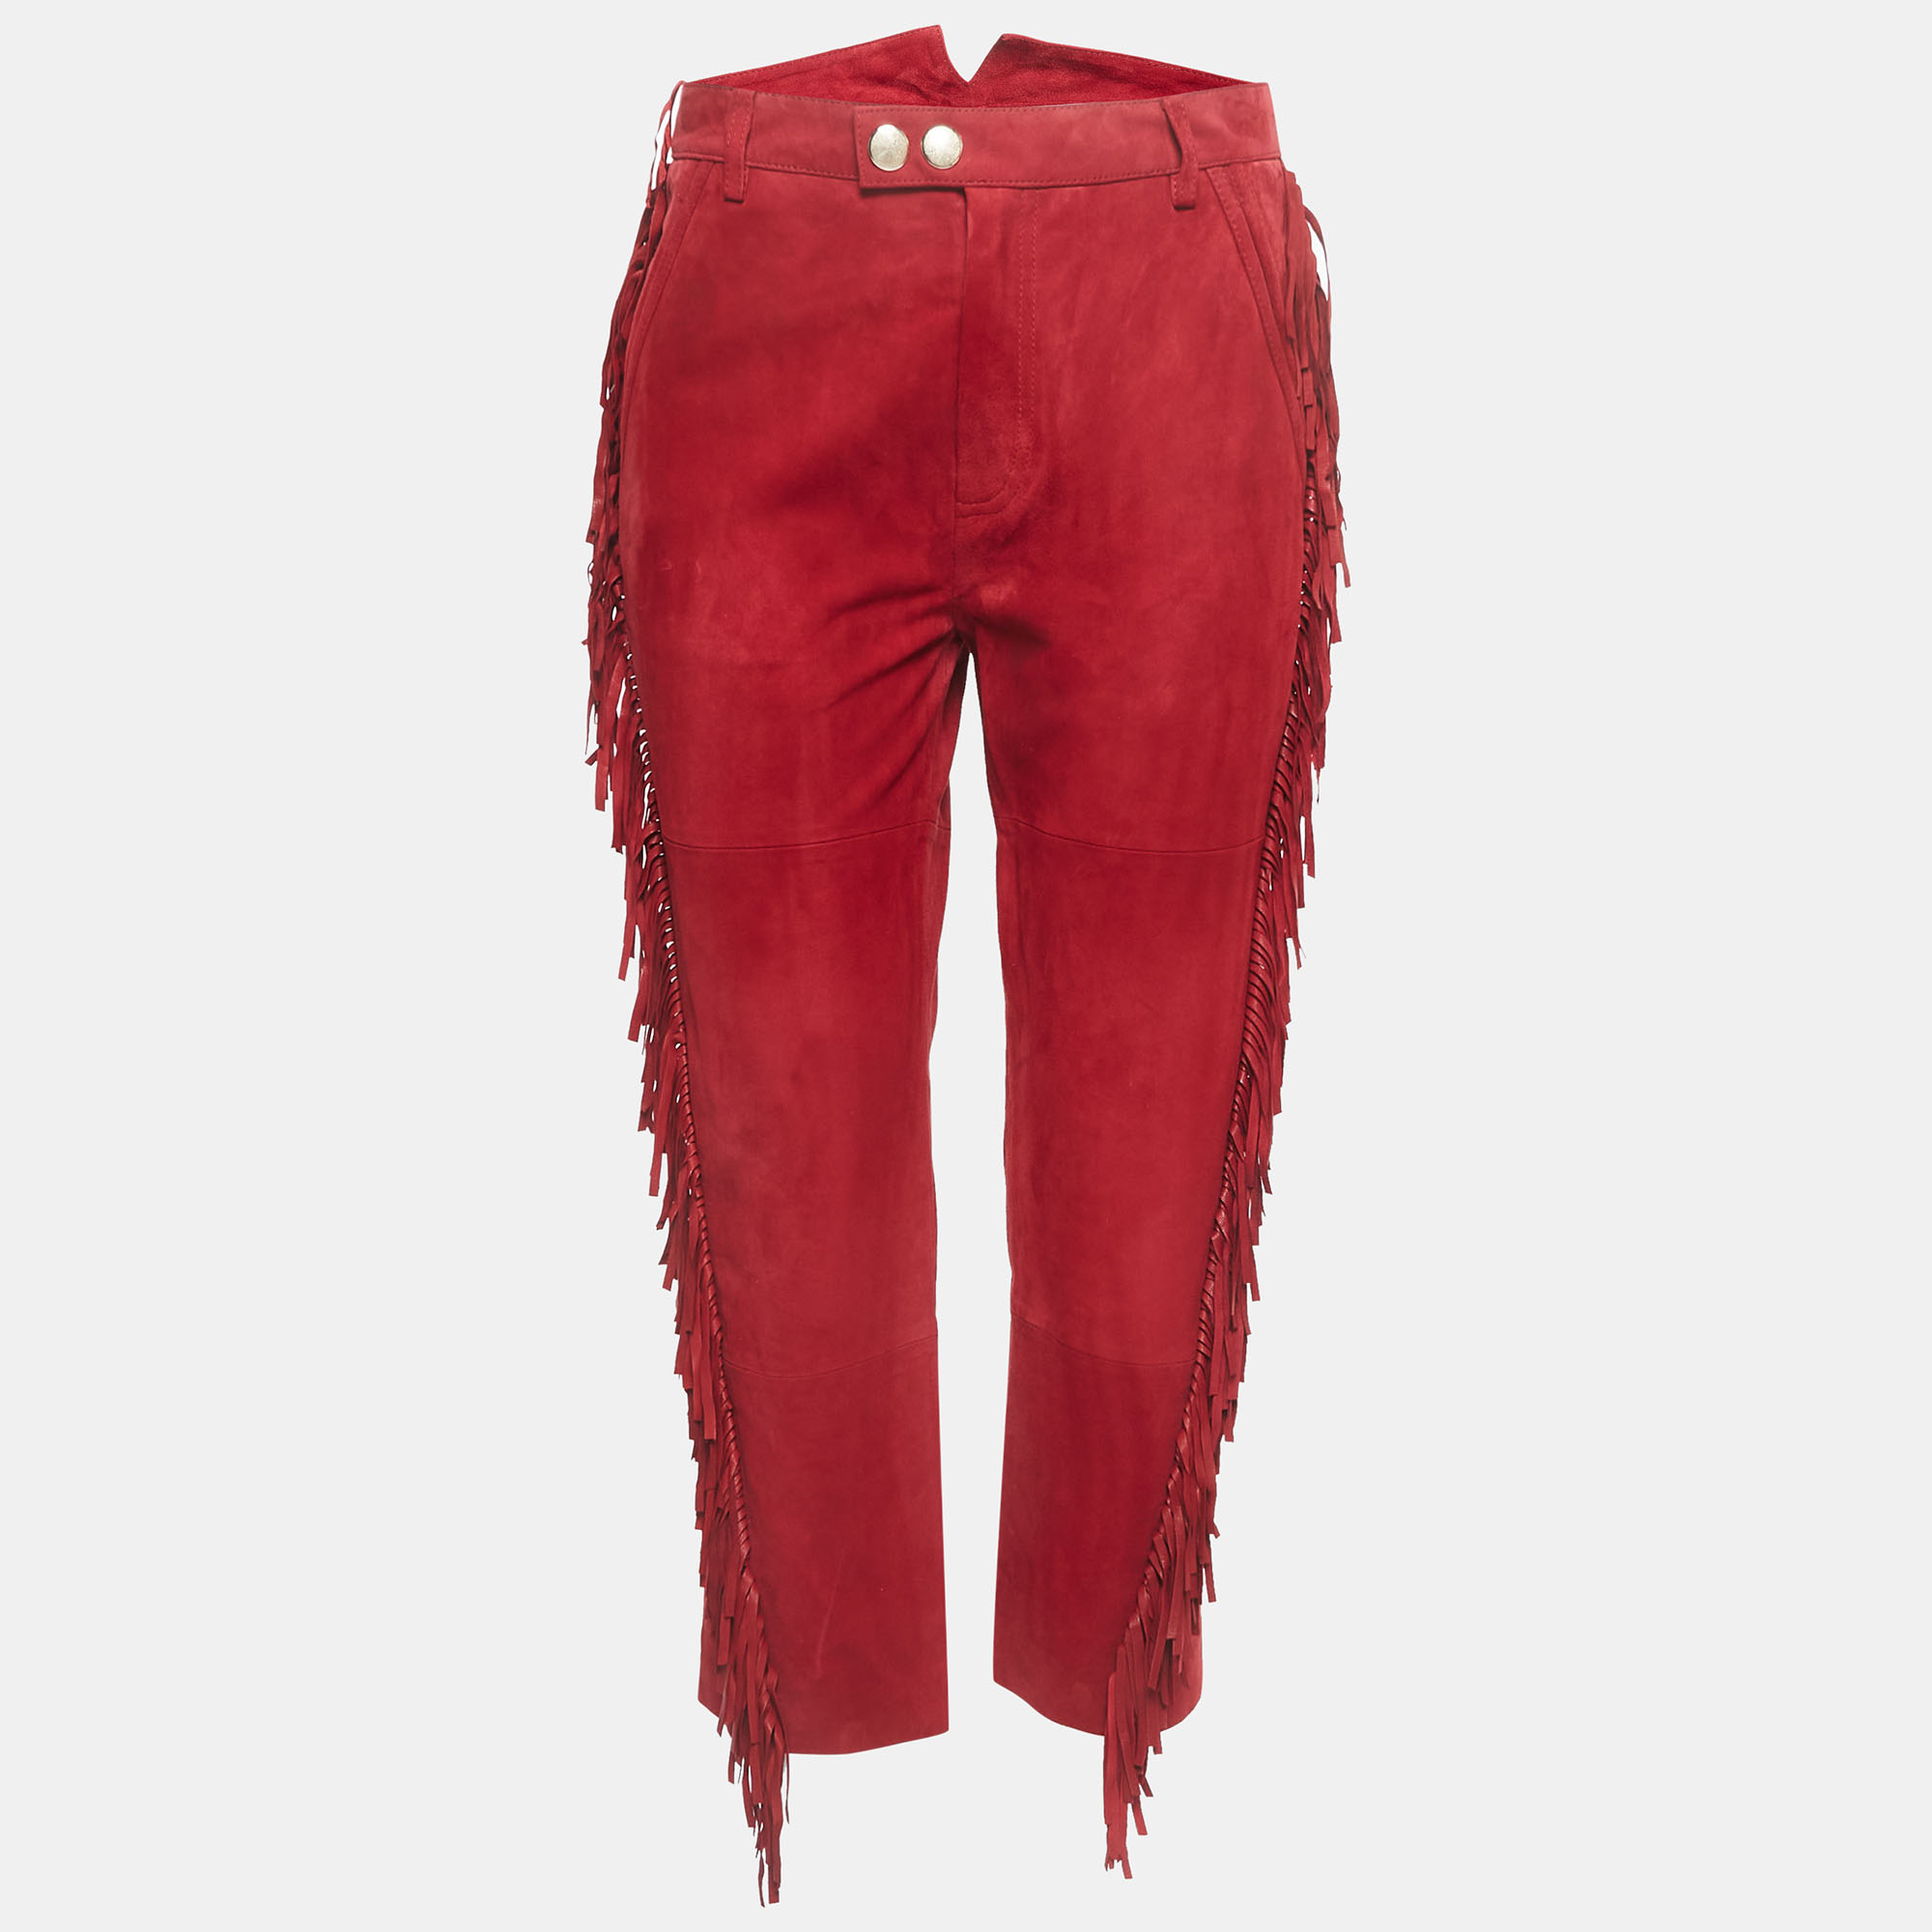 Zadig & voltaire red suede fringed trousers s